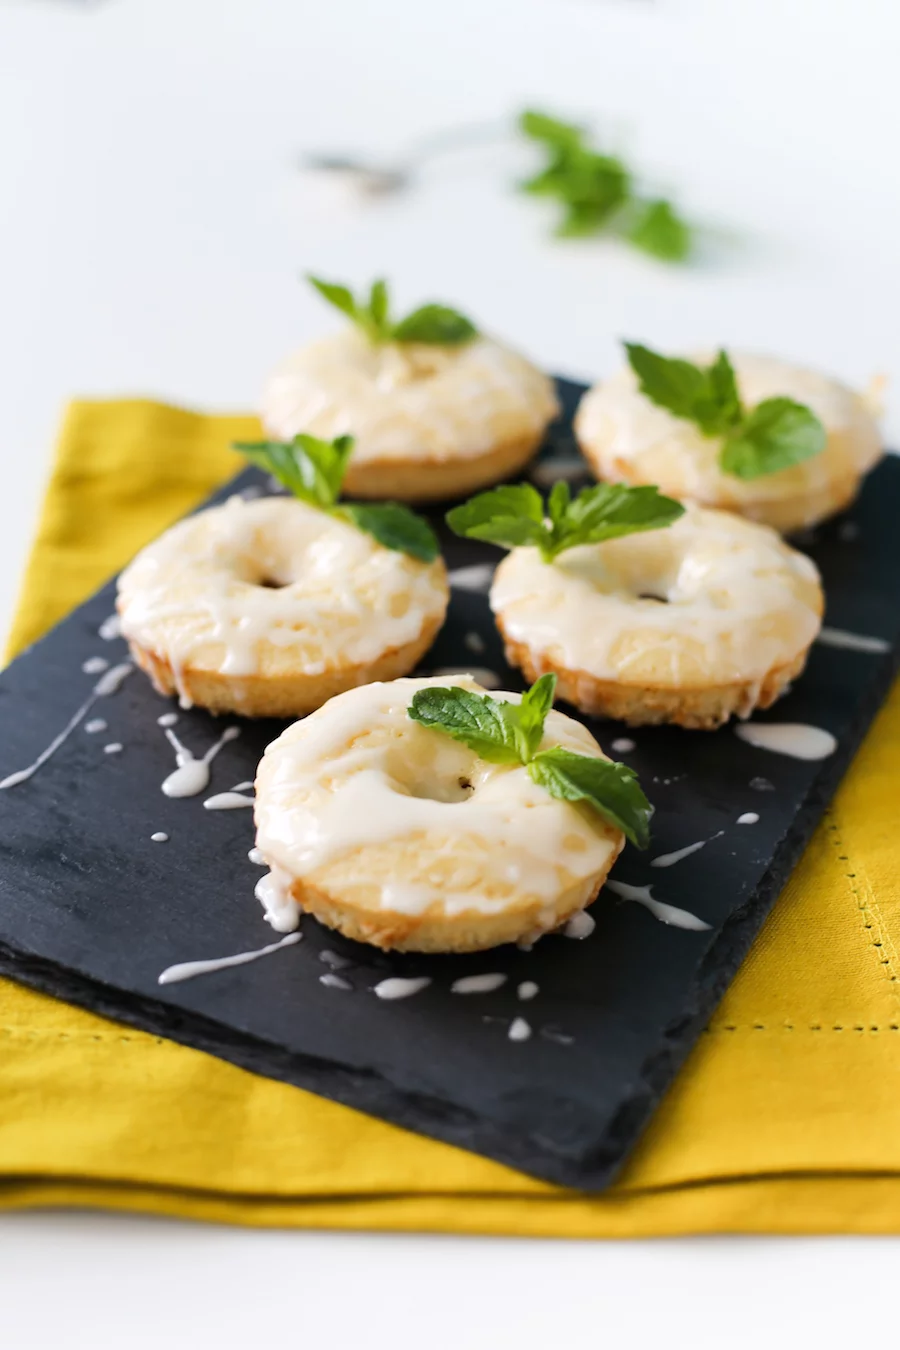 Mint julep donuts from Salty Canary.